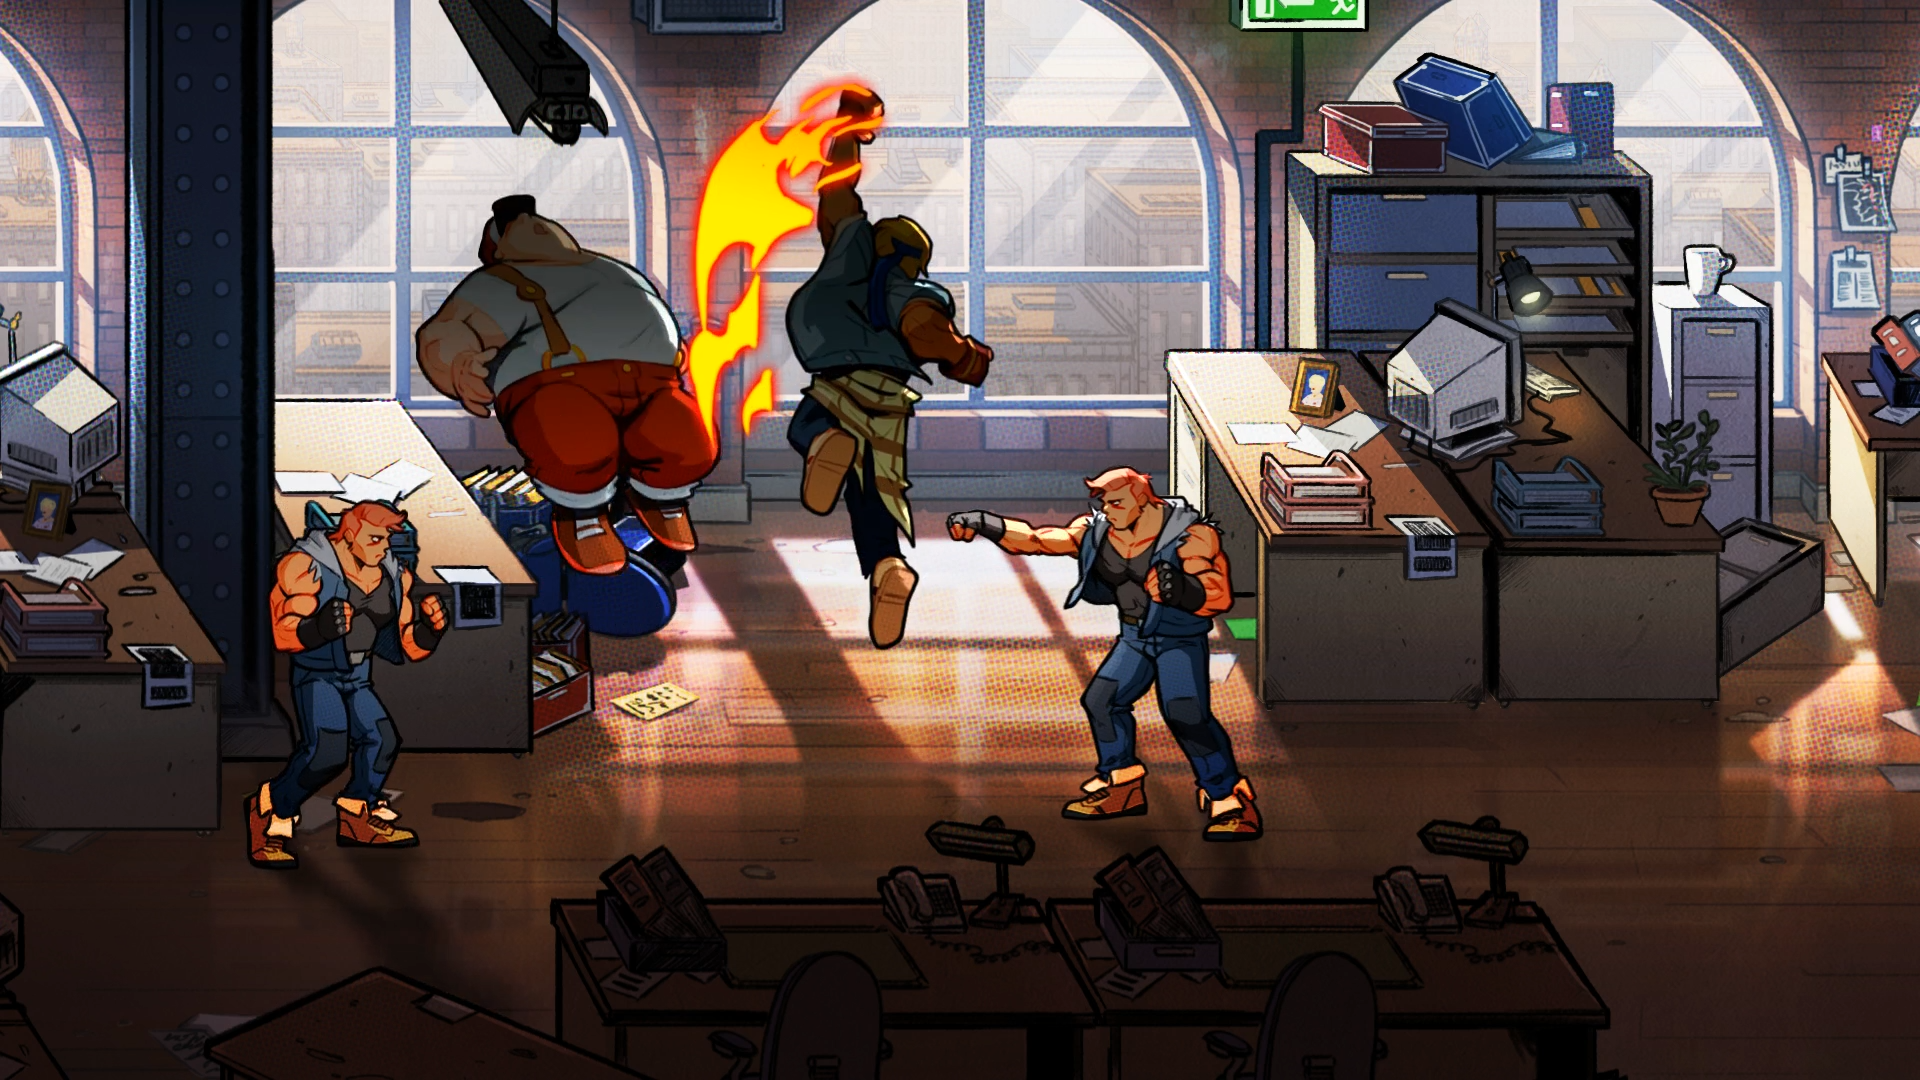 [MULTI] Streets of Rage 4 Streets-of-Rage-4-7